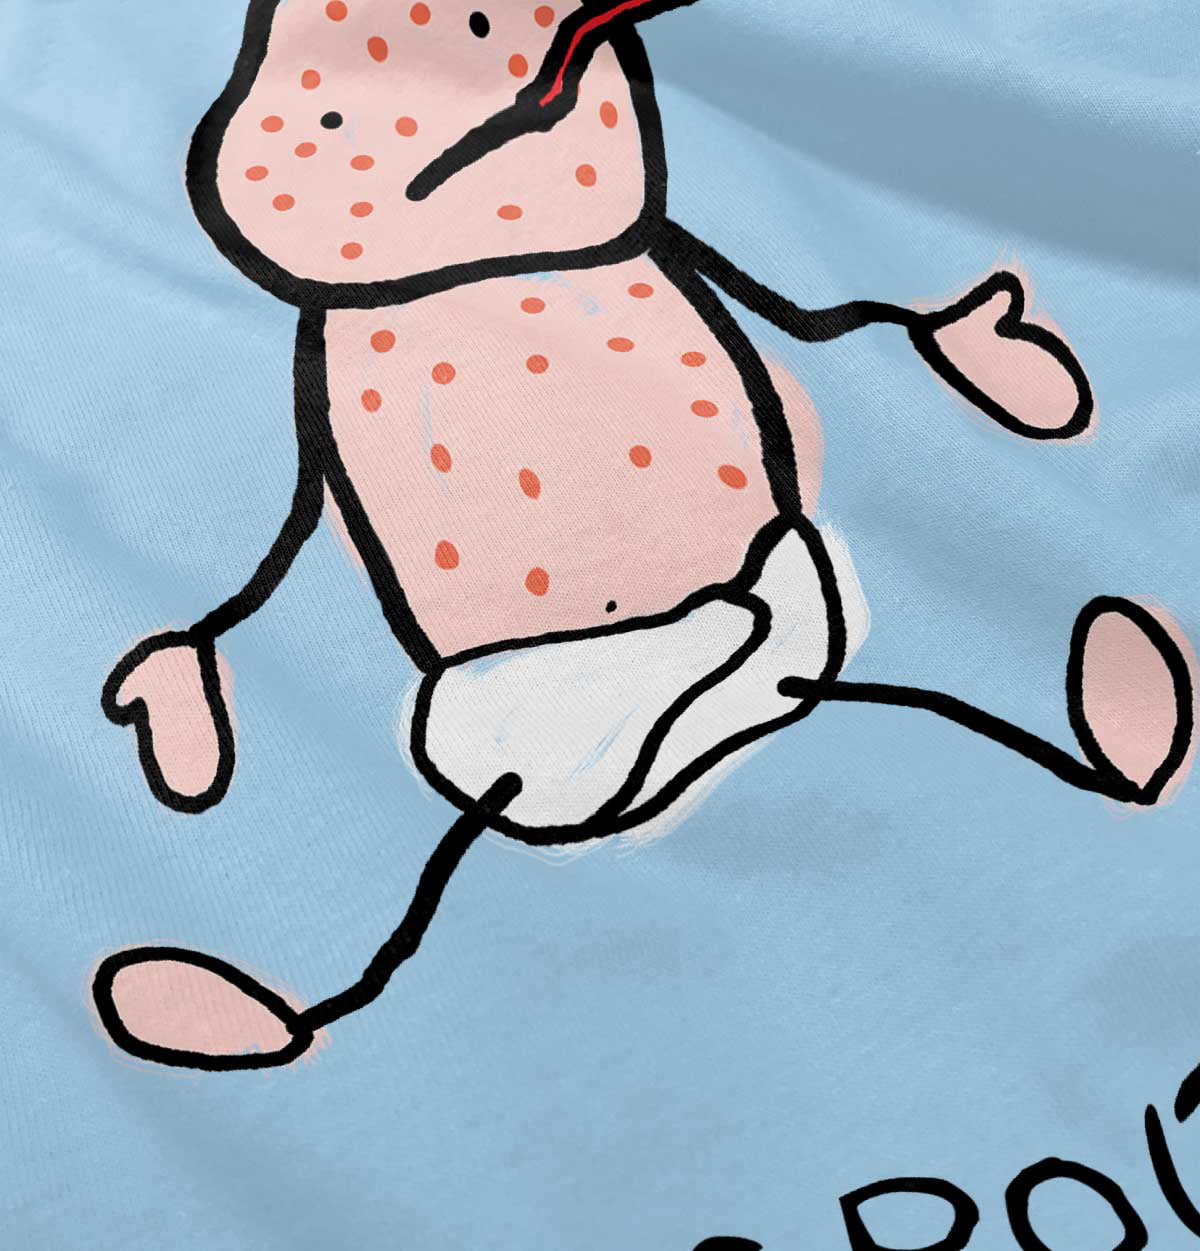 Details about   Cicken Pox Sick Ill Gerber OnesieNovelty Graphic Gift Idea Baby Romper Shirt 